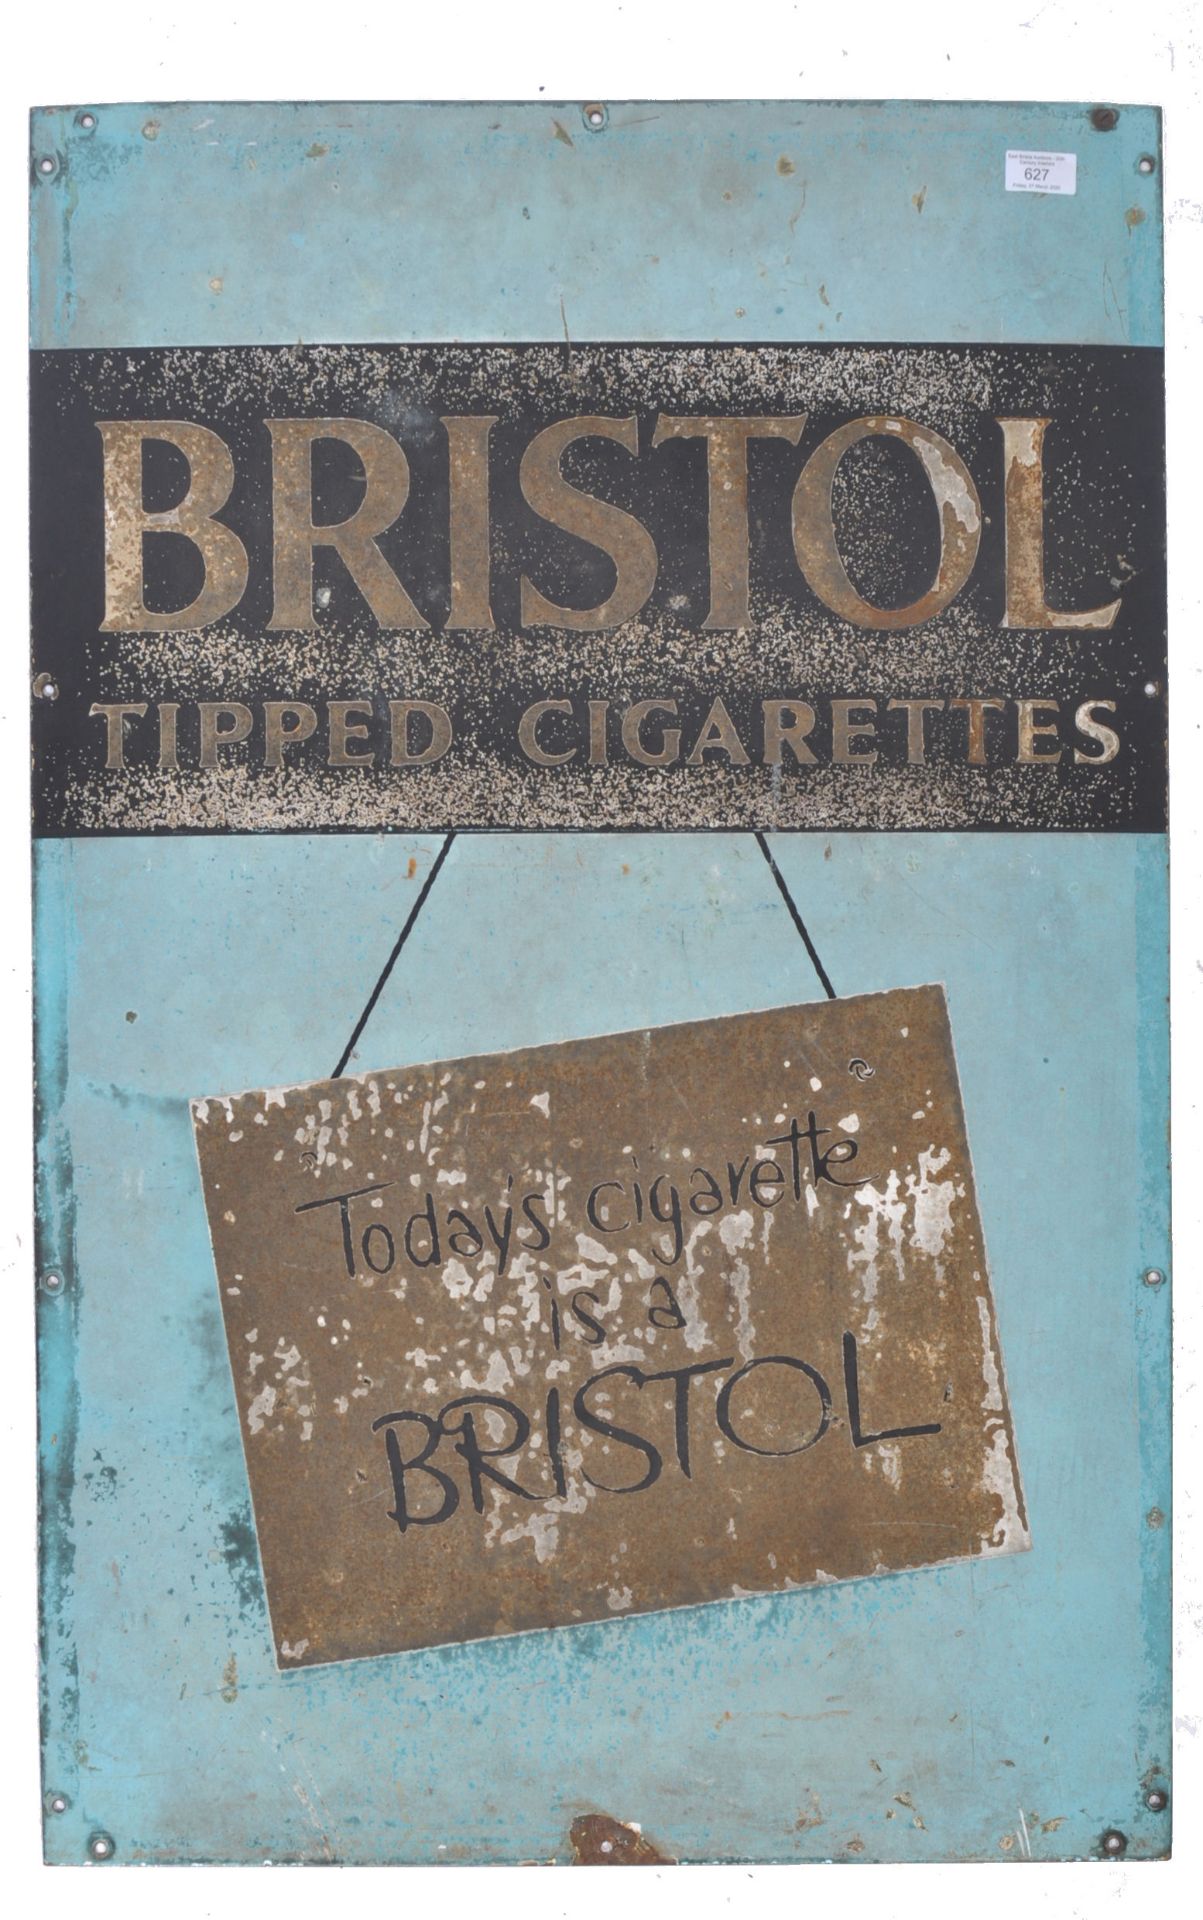 ORIGINAL ADVERTISING SIGN FOR BRISTOL TIPPED CIGARETTES